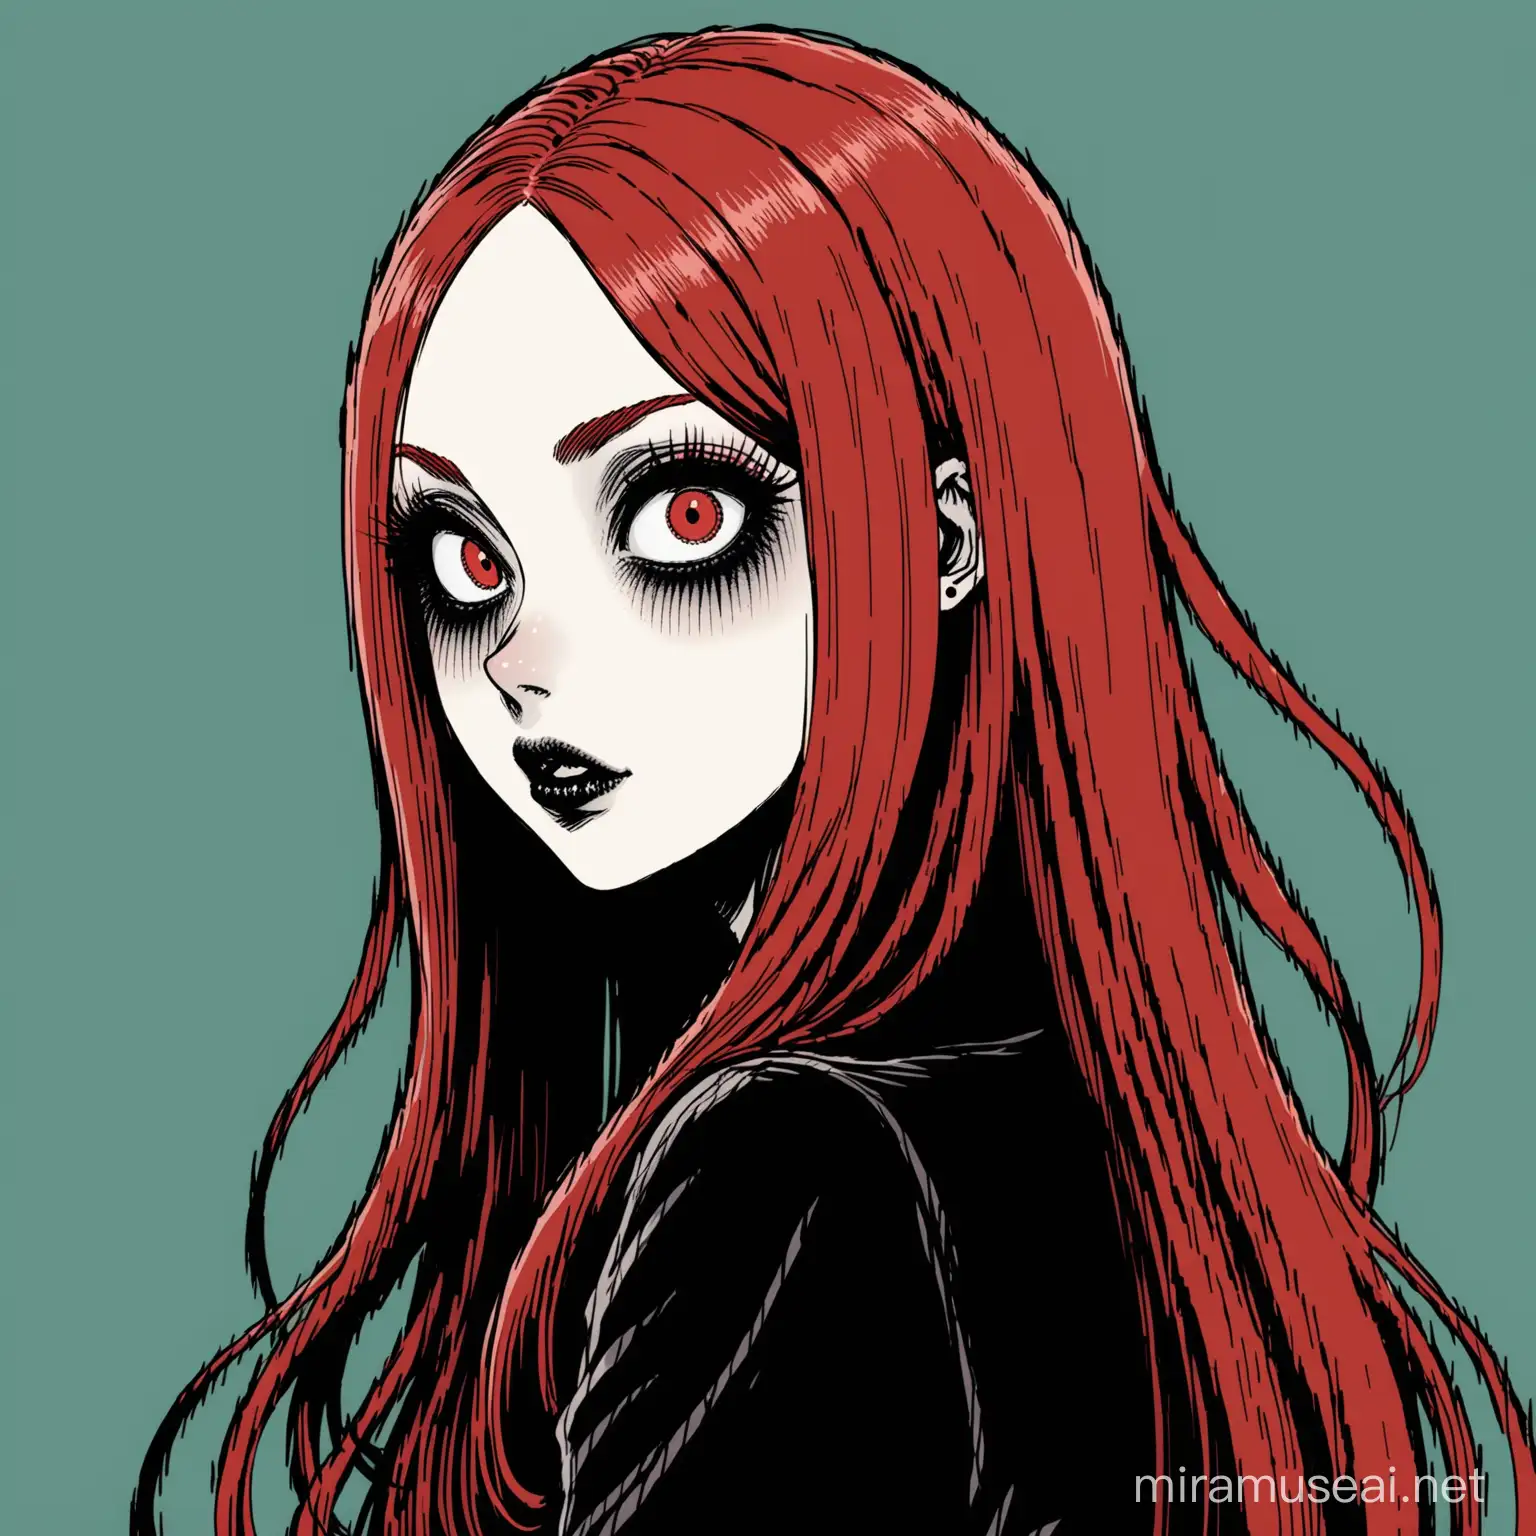 Mysterious Redhead Woman with Long Hair in Junji Ito Style